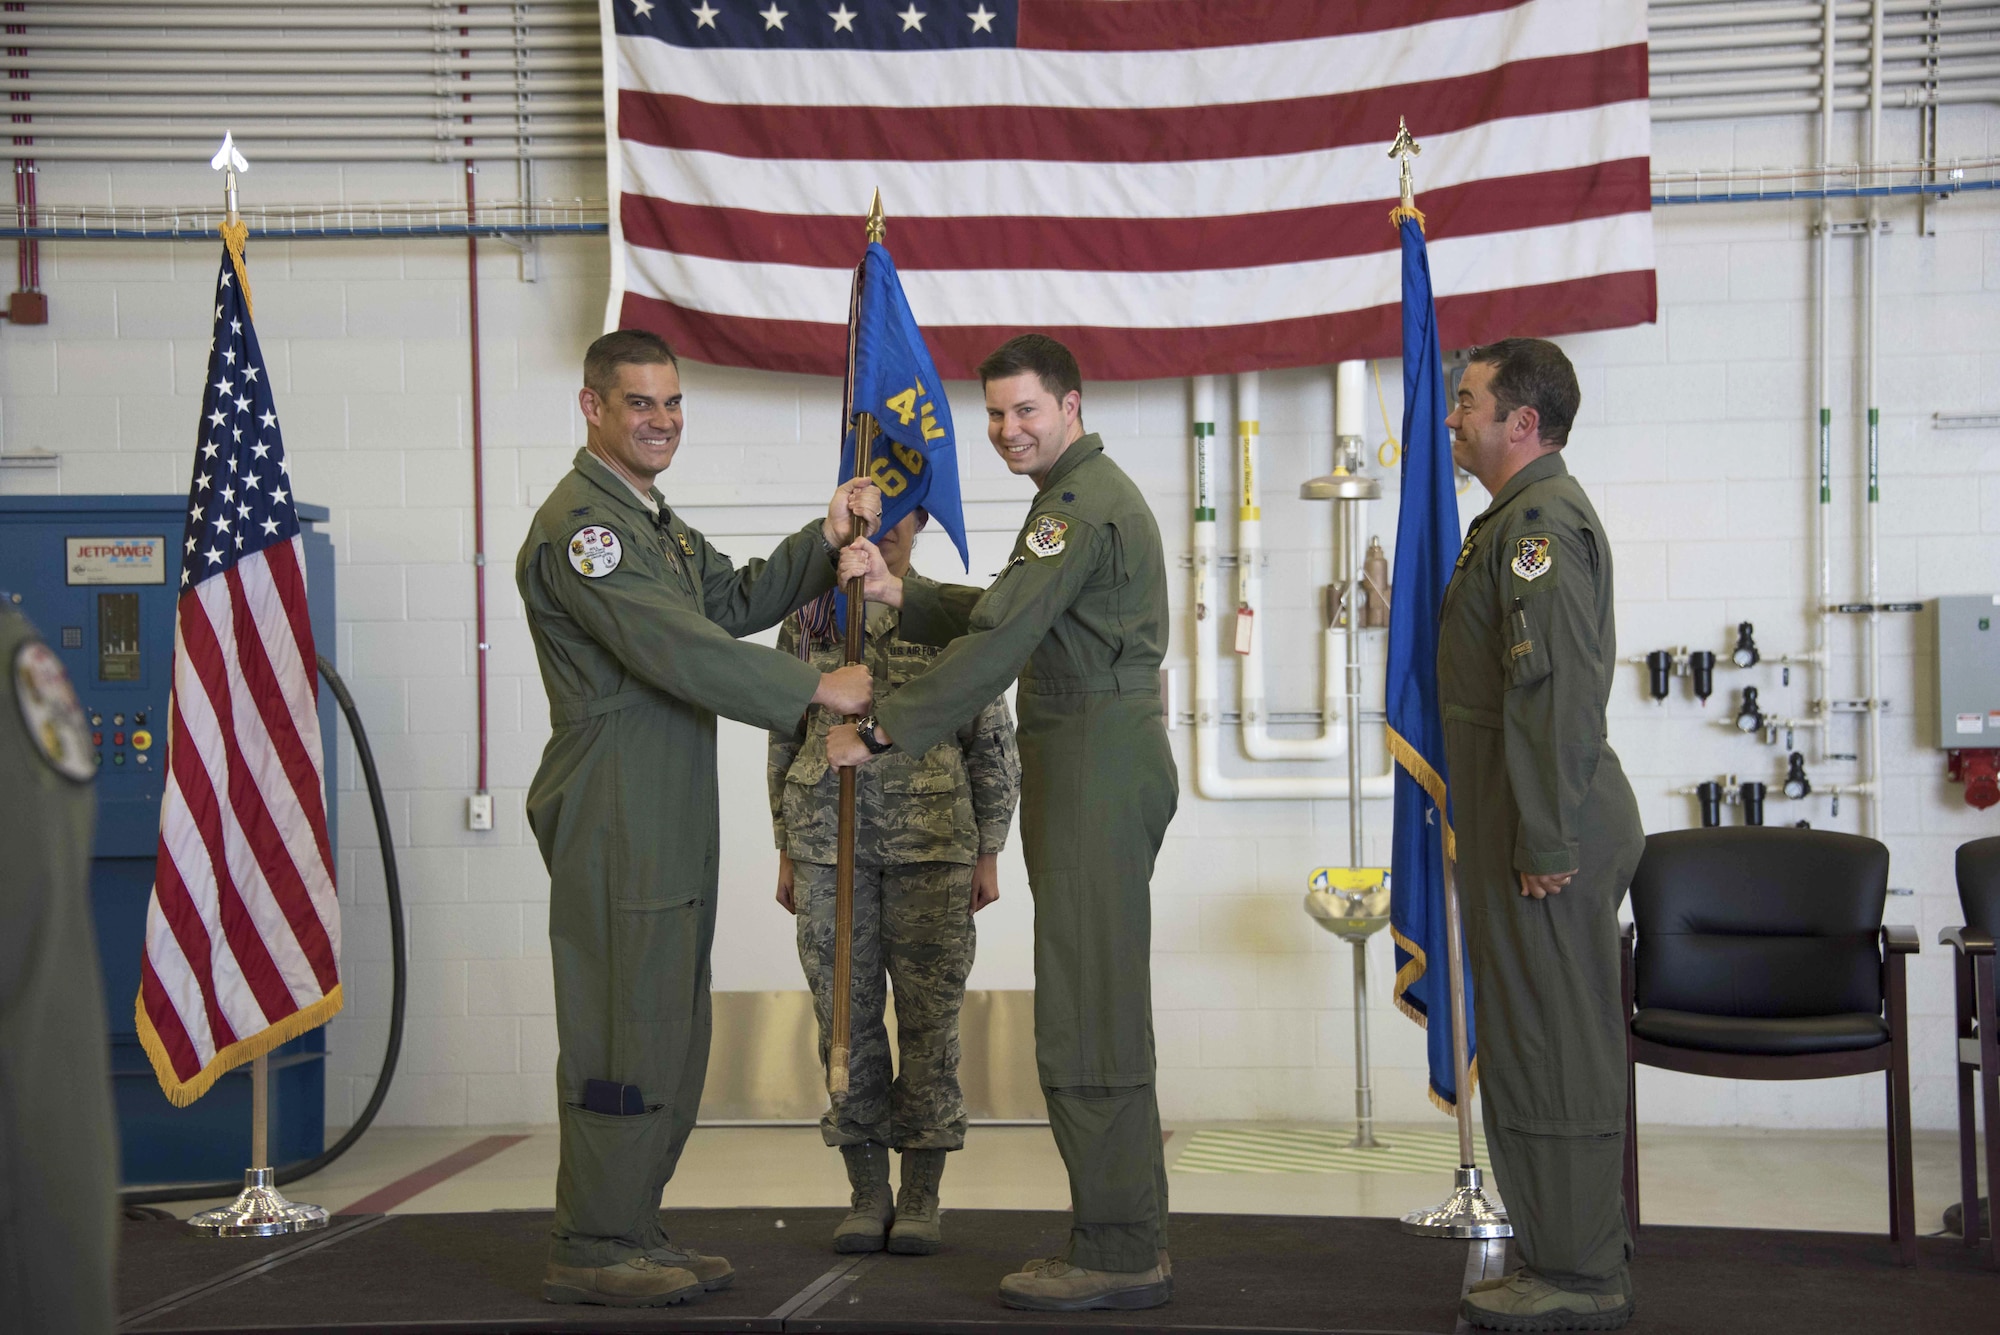 Col. David Castaneda (left), 419th Operations Group commander, passes the 466th Fighter Squadron flag to Lt. Col. Dave DeAngelis during a change of command ceremony at Hill Air Force Base, Utah, June 4. “We take a big step today as we move through the transition to the F-35,” Castaneda said. (U.S. Air Force photo/Senior Airman Justin Fuchs)